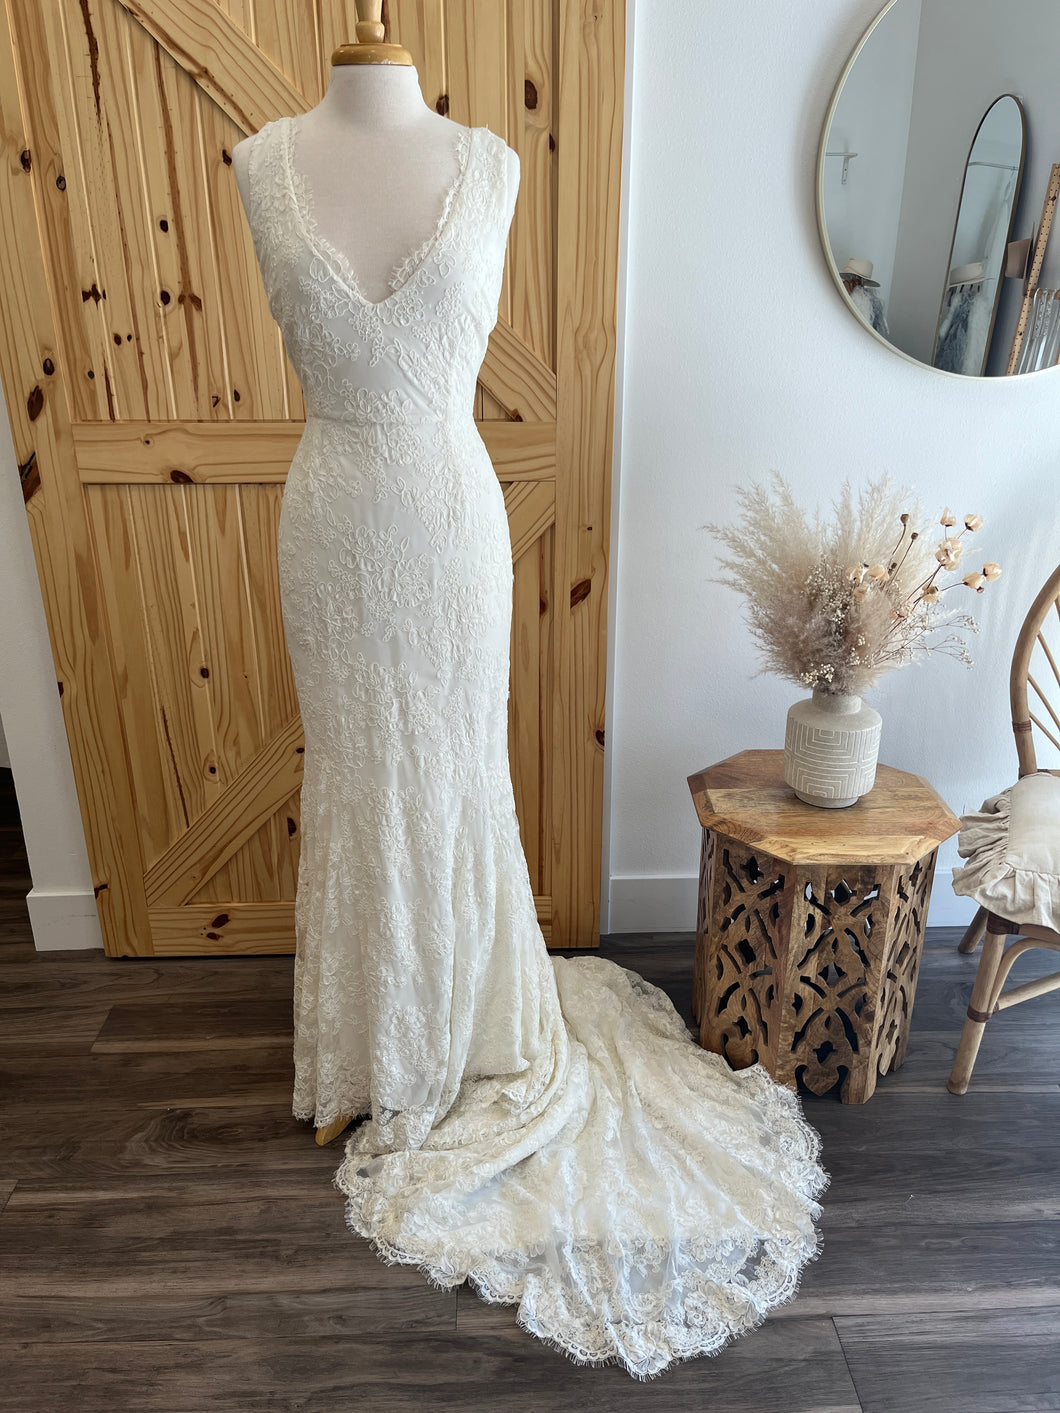 SAMPLE SALE: Daughters of Simone, Asa Gown